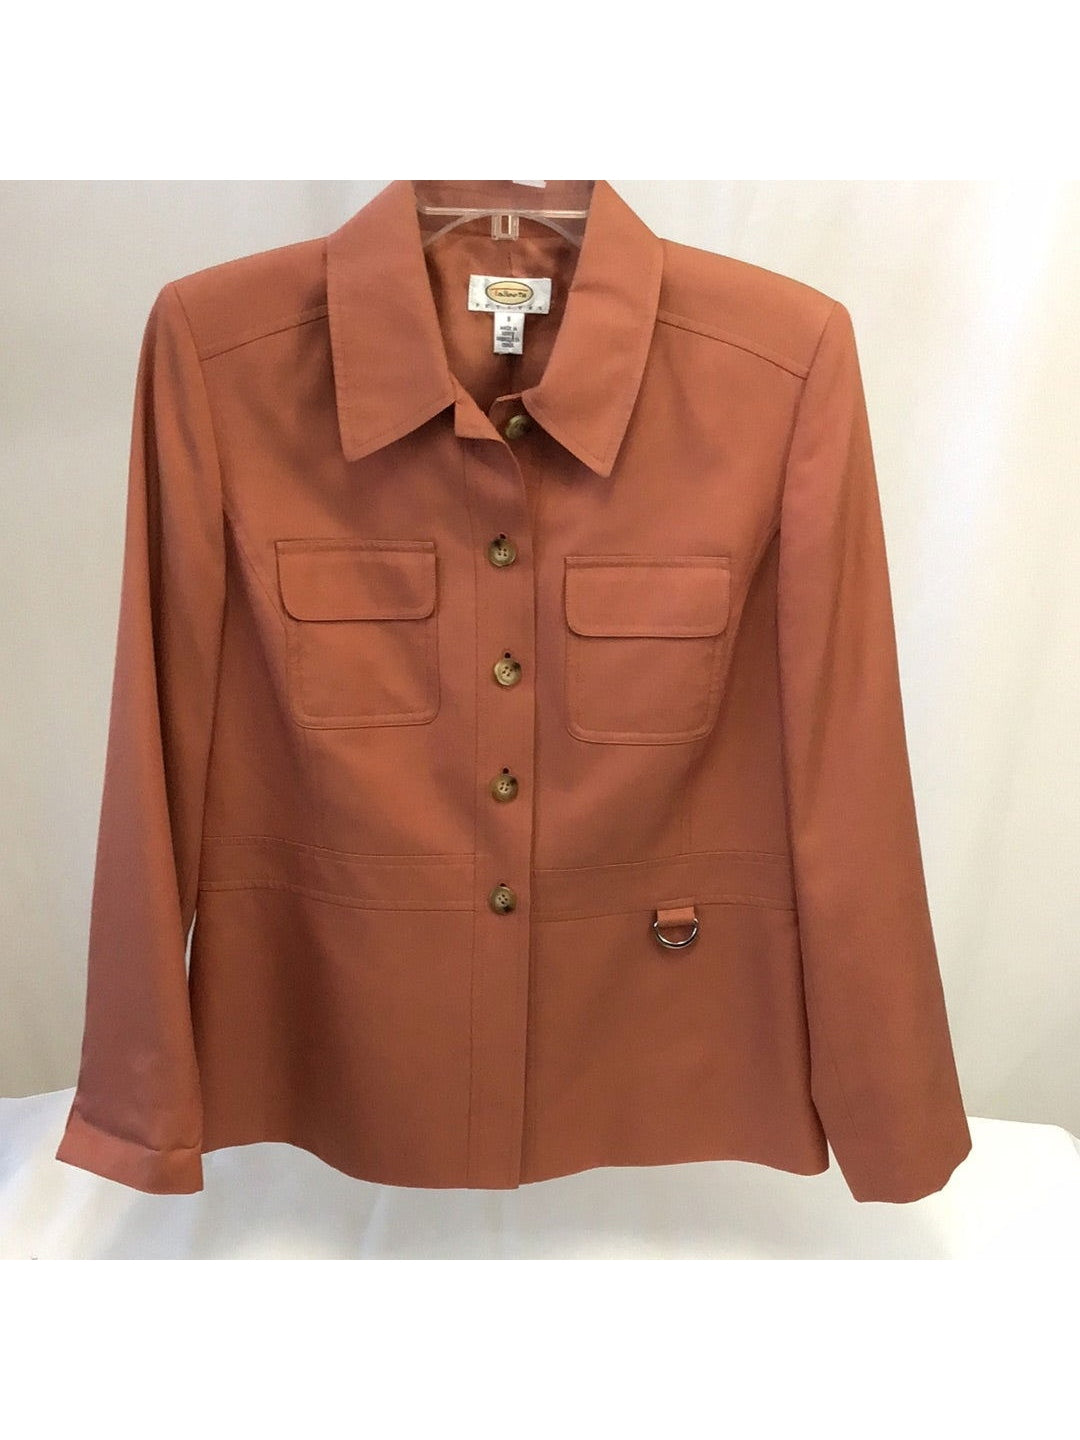 Talbots Petites Ladies Coral Collared Buttoned Blazer - Size 8 - The Kennedy Collective Thrift - 